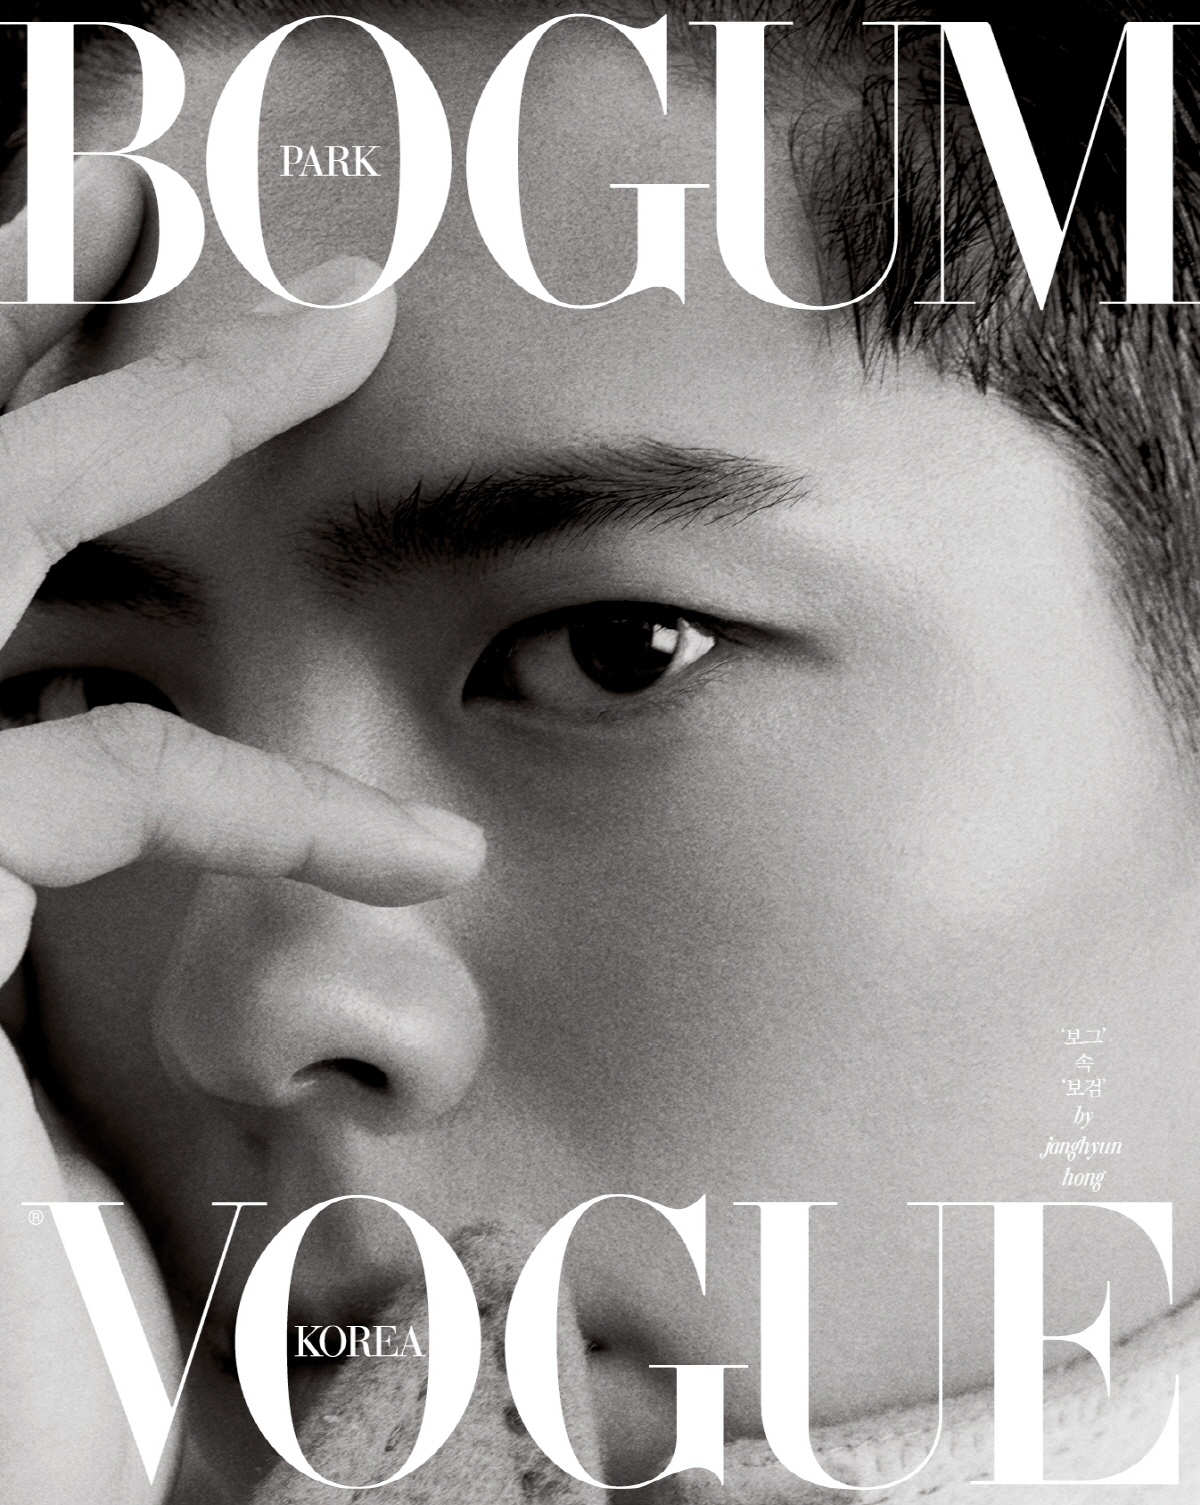 Actor Park Bo-gum has graced the cover of the first issue of the fashion magazine Vogue Koreas 24th anniversary.This film, which was held at Changdeokgung, created an emotional visual that seemed to see a movie on the other hand, combining the premiere beauty of the palace and the restrained masculine beauty of Actor Park Bo-gum.Park Bo-gum is said to have maximized the perfection of the picture by overwhelming his gaze with his charisma by freely digesting various styles.In addition, interviews will be published with honest stories about the thoughts and values ​​of twenty-eight Park Bo-gum.According to the official, Park Bo-gum Actors proposal to promote the beauty of Korea has made it to Changdeokgung. Park Bo-gum is a warm and caring inner owner, but he is more cool professional than anyone else in his work. The interview with the picture of Vogue Korea was confirmed in Korea, Taiwan, Thailand, Hong Kong edition Vogue and Chinese edition Vogue ME, and proved the Korean wave power of Park Bo-gum, which captivated Asia.The August issue of Vogue Korea, which includes interviews with Park Bo-gum Actors pictures, will be published on July 20.